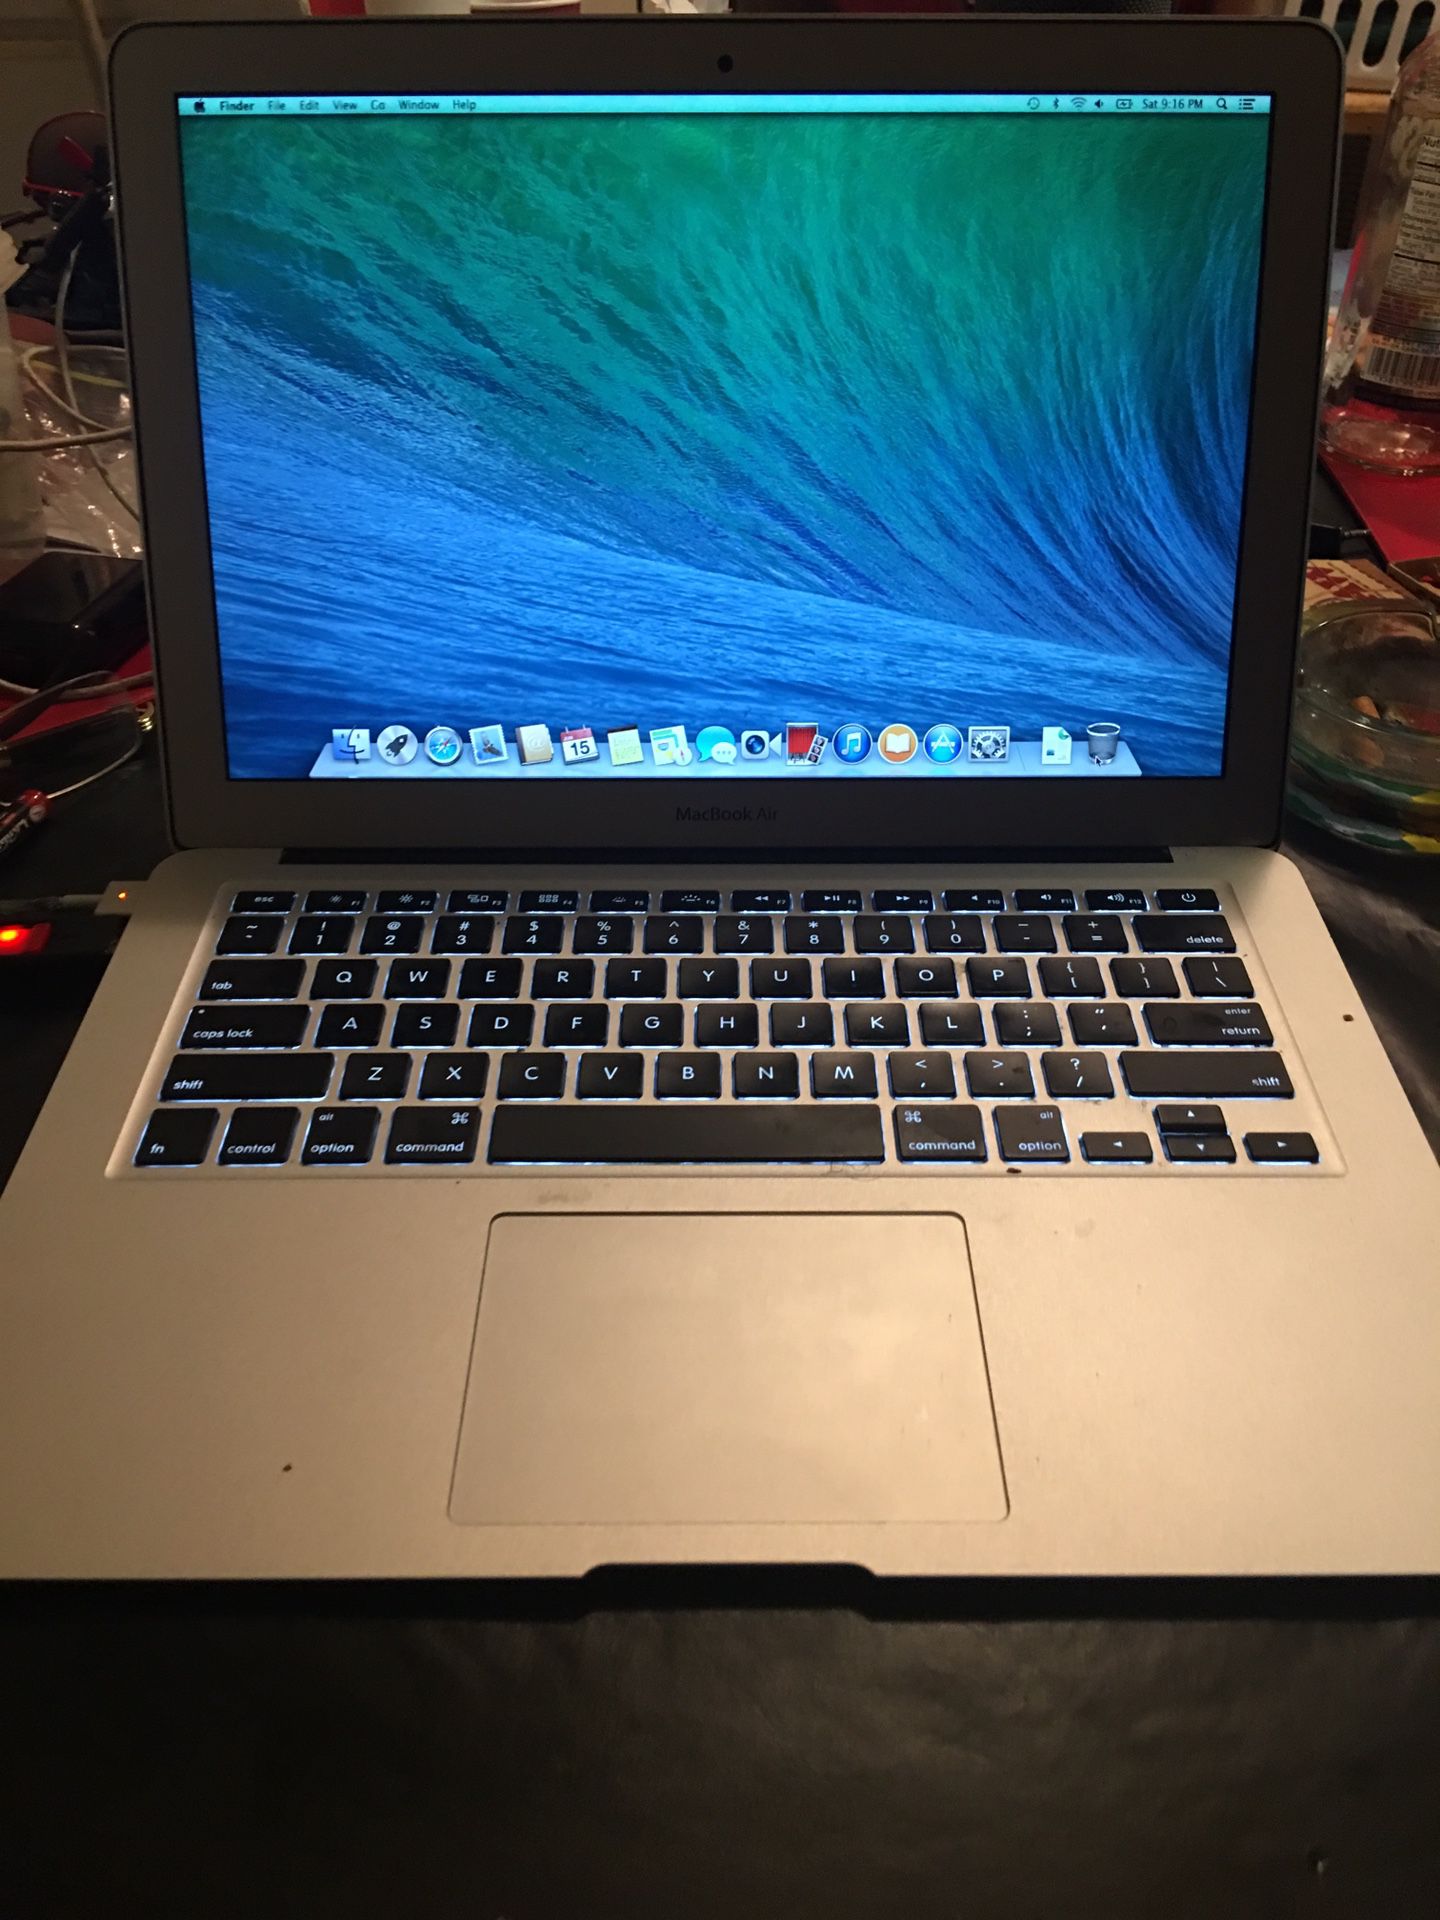 Mid 2013 MacBook Air i5/4gb/256gb Has Final Cut Pro X, Parallels Desktop running Windows 7 and much more